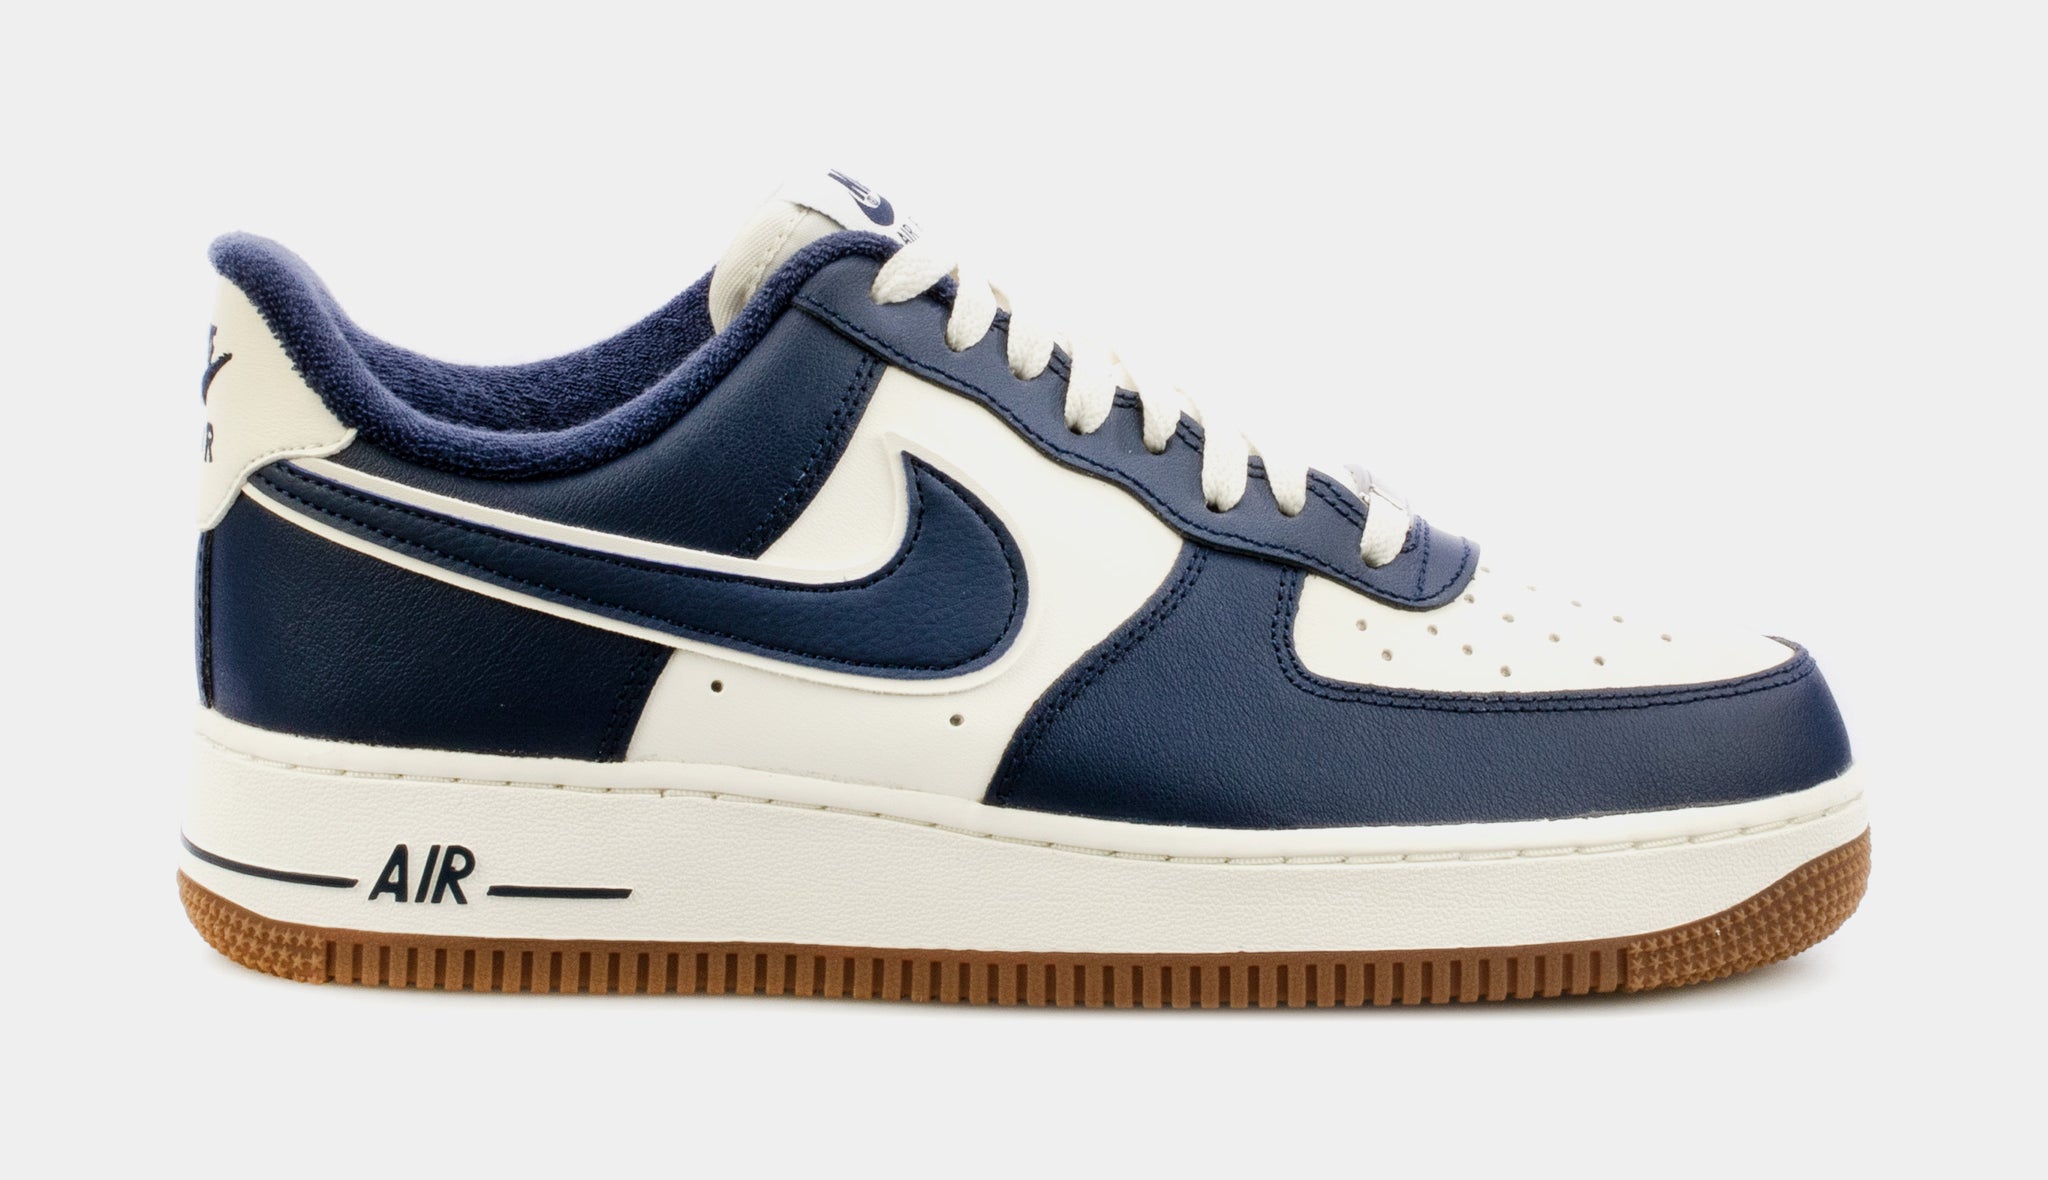 Air Force 1 07 LV8 Mens Basketball Shoes (Navy Blue/White)